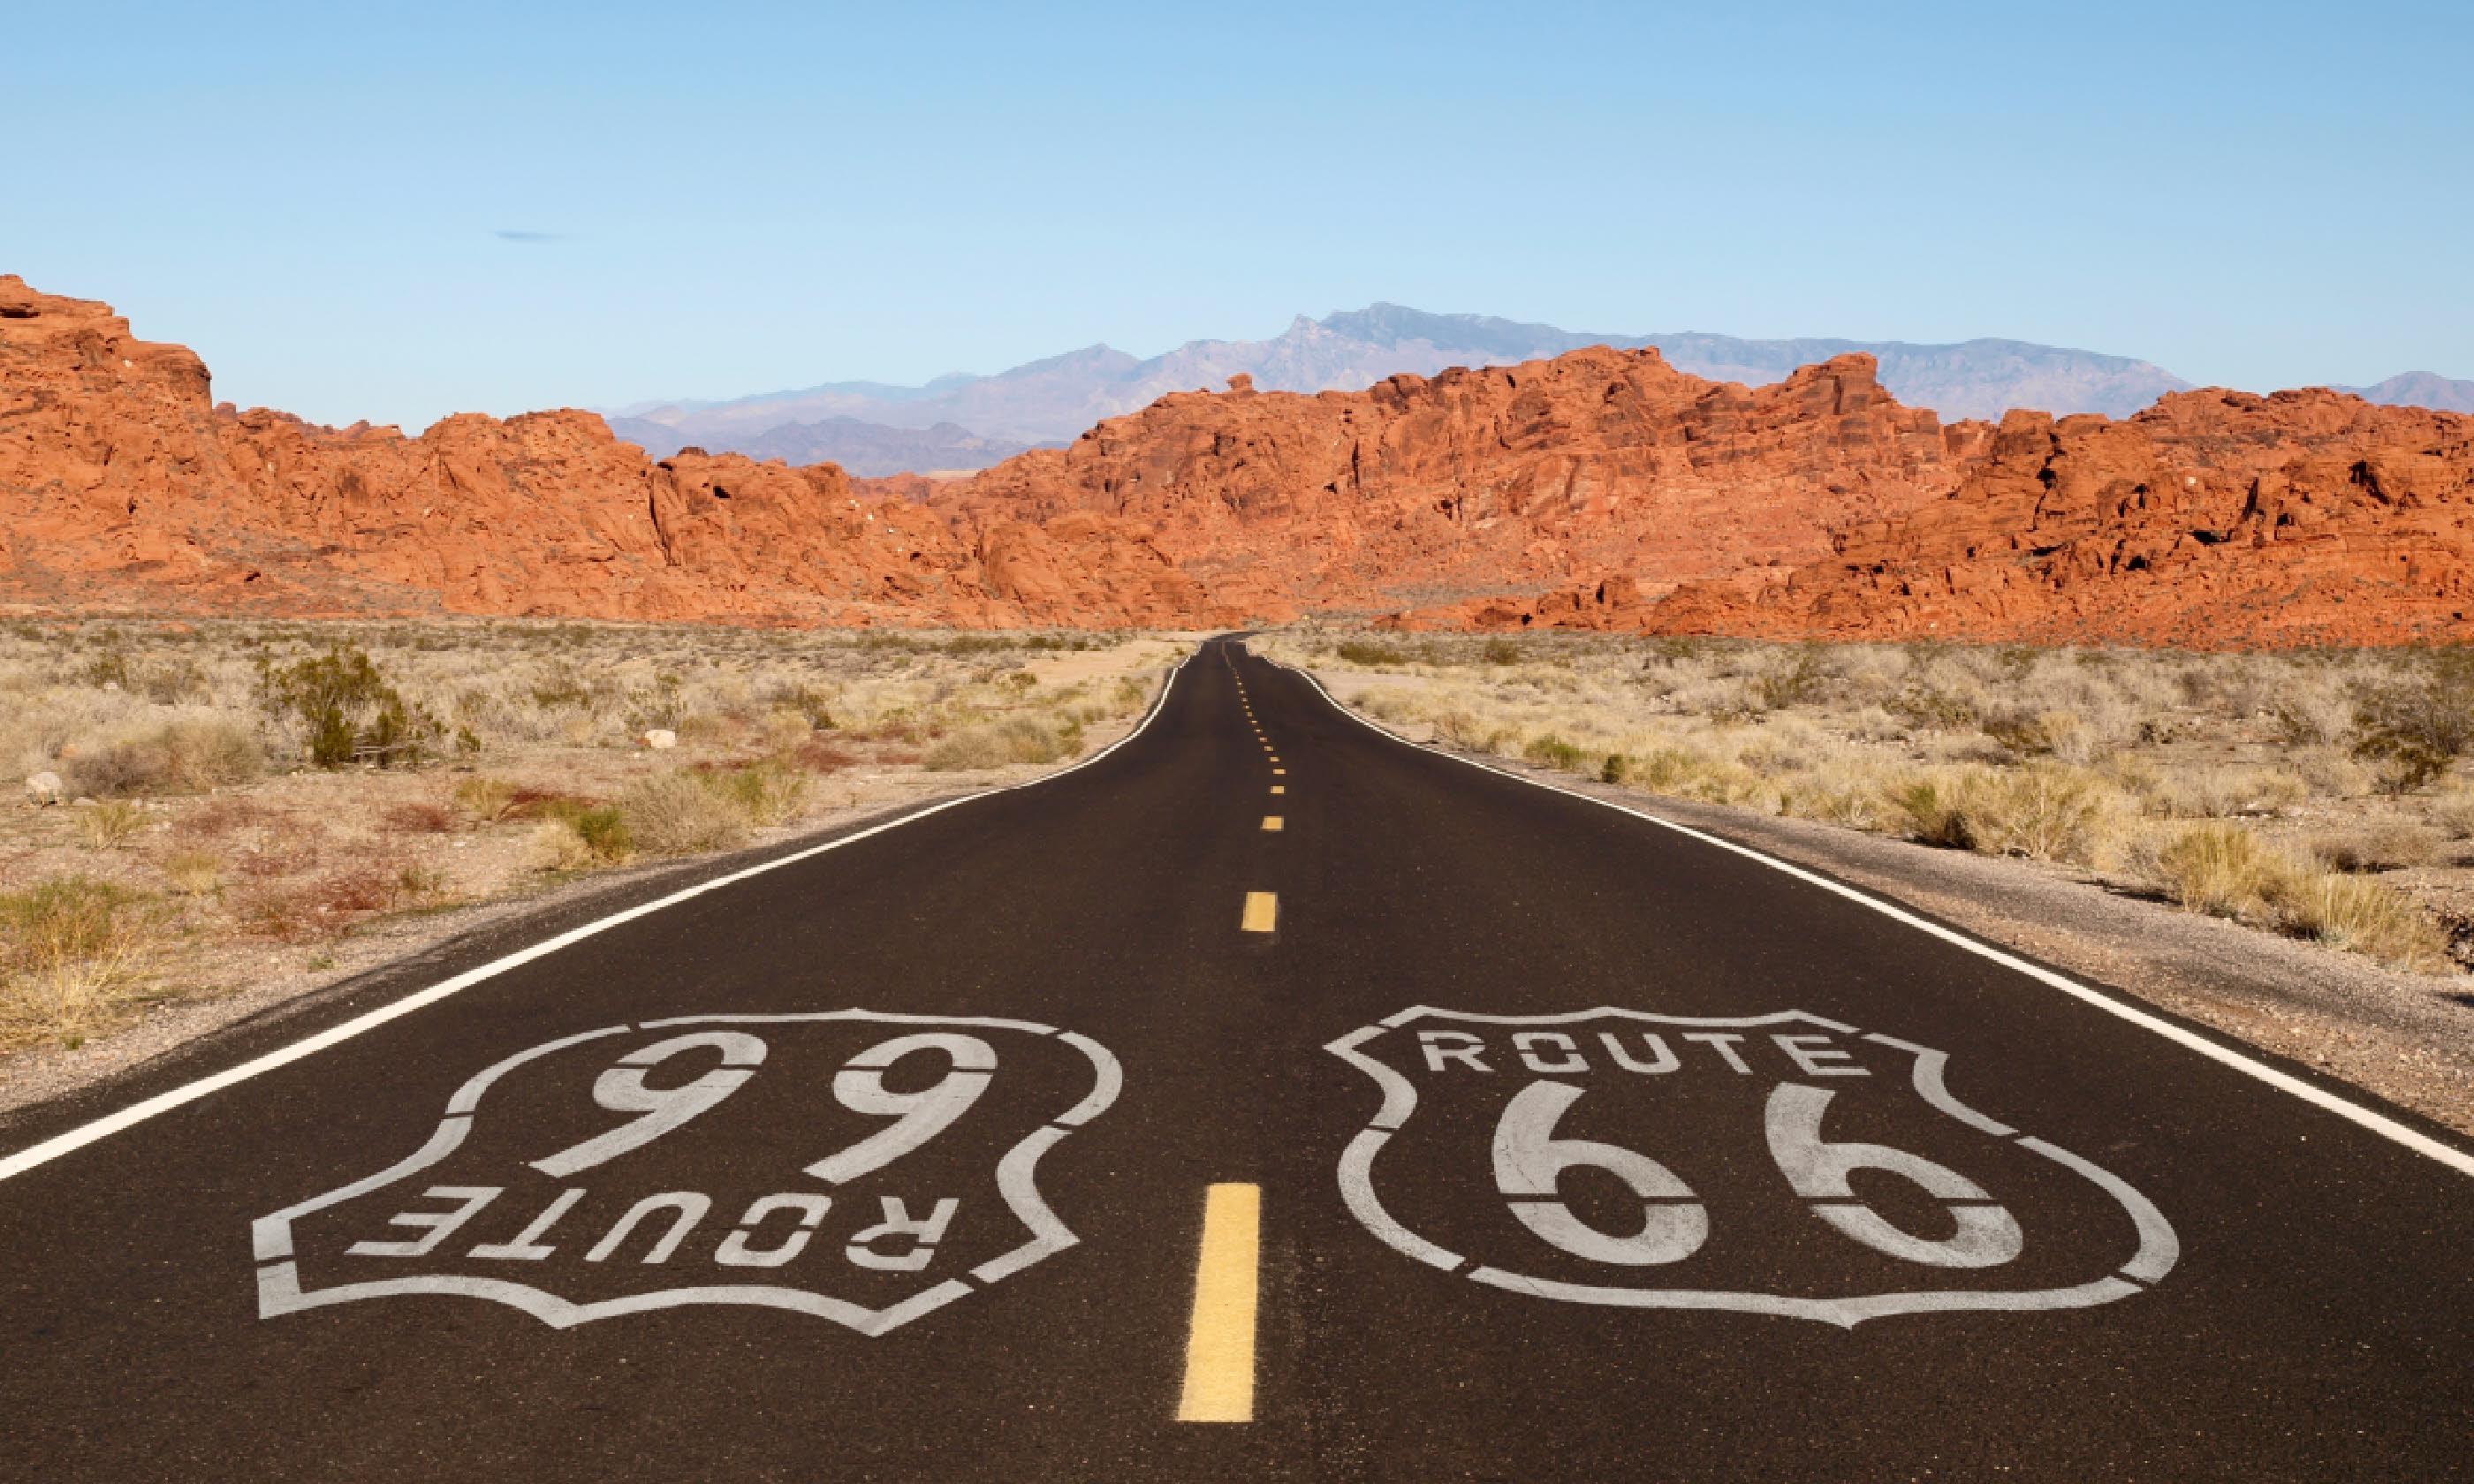 Route 66 pavement sign (Shutterstock: see credit below)